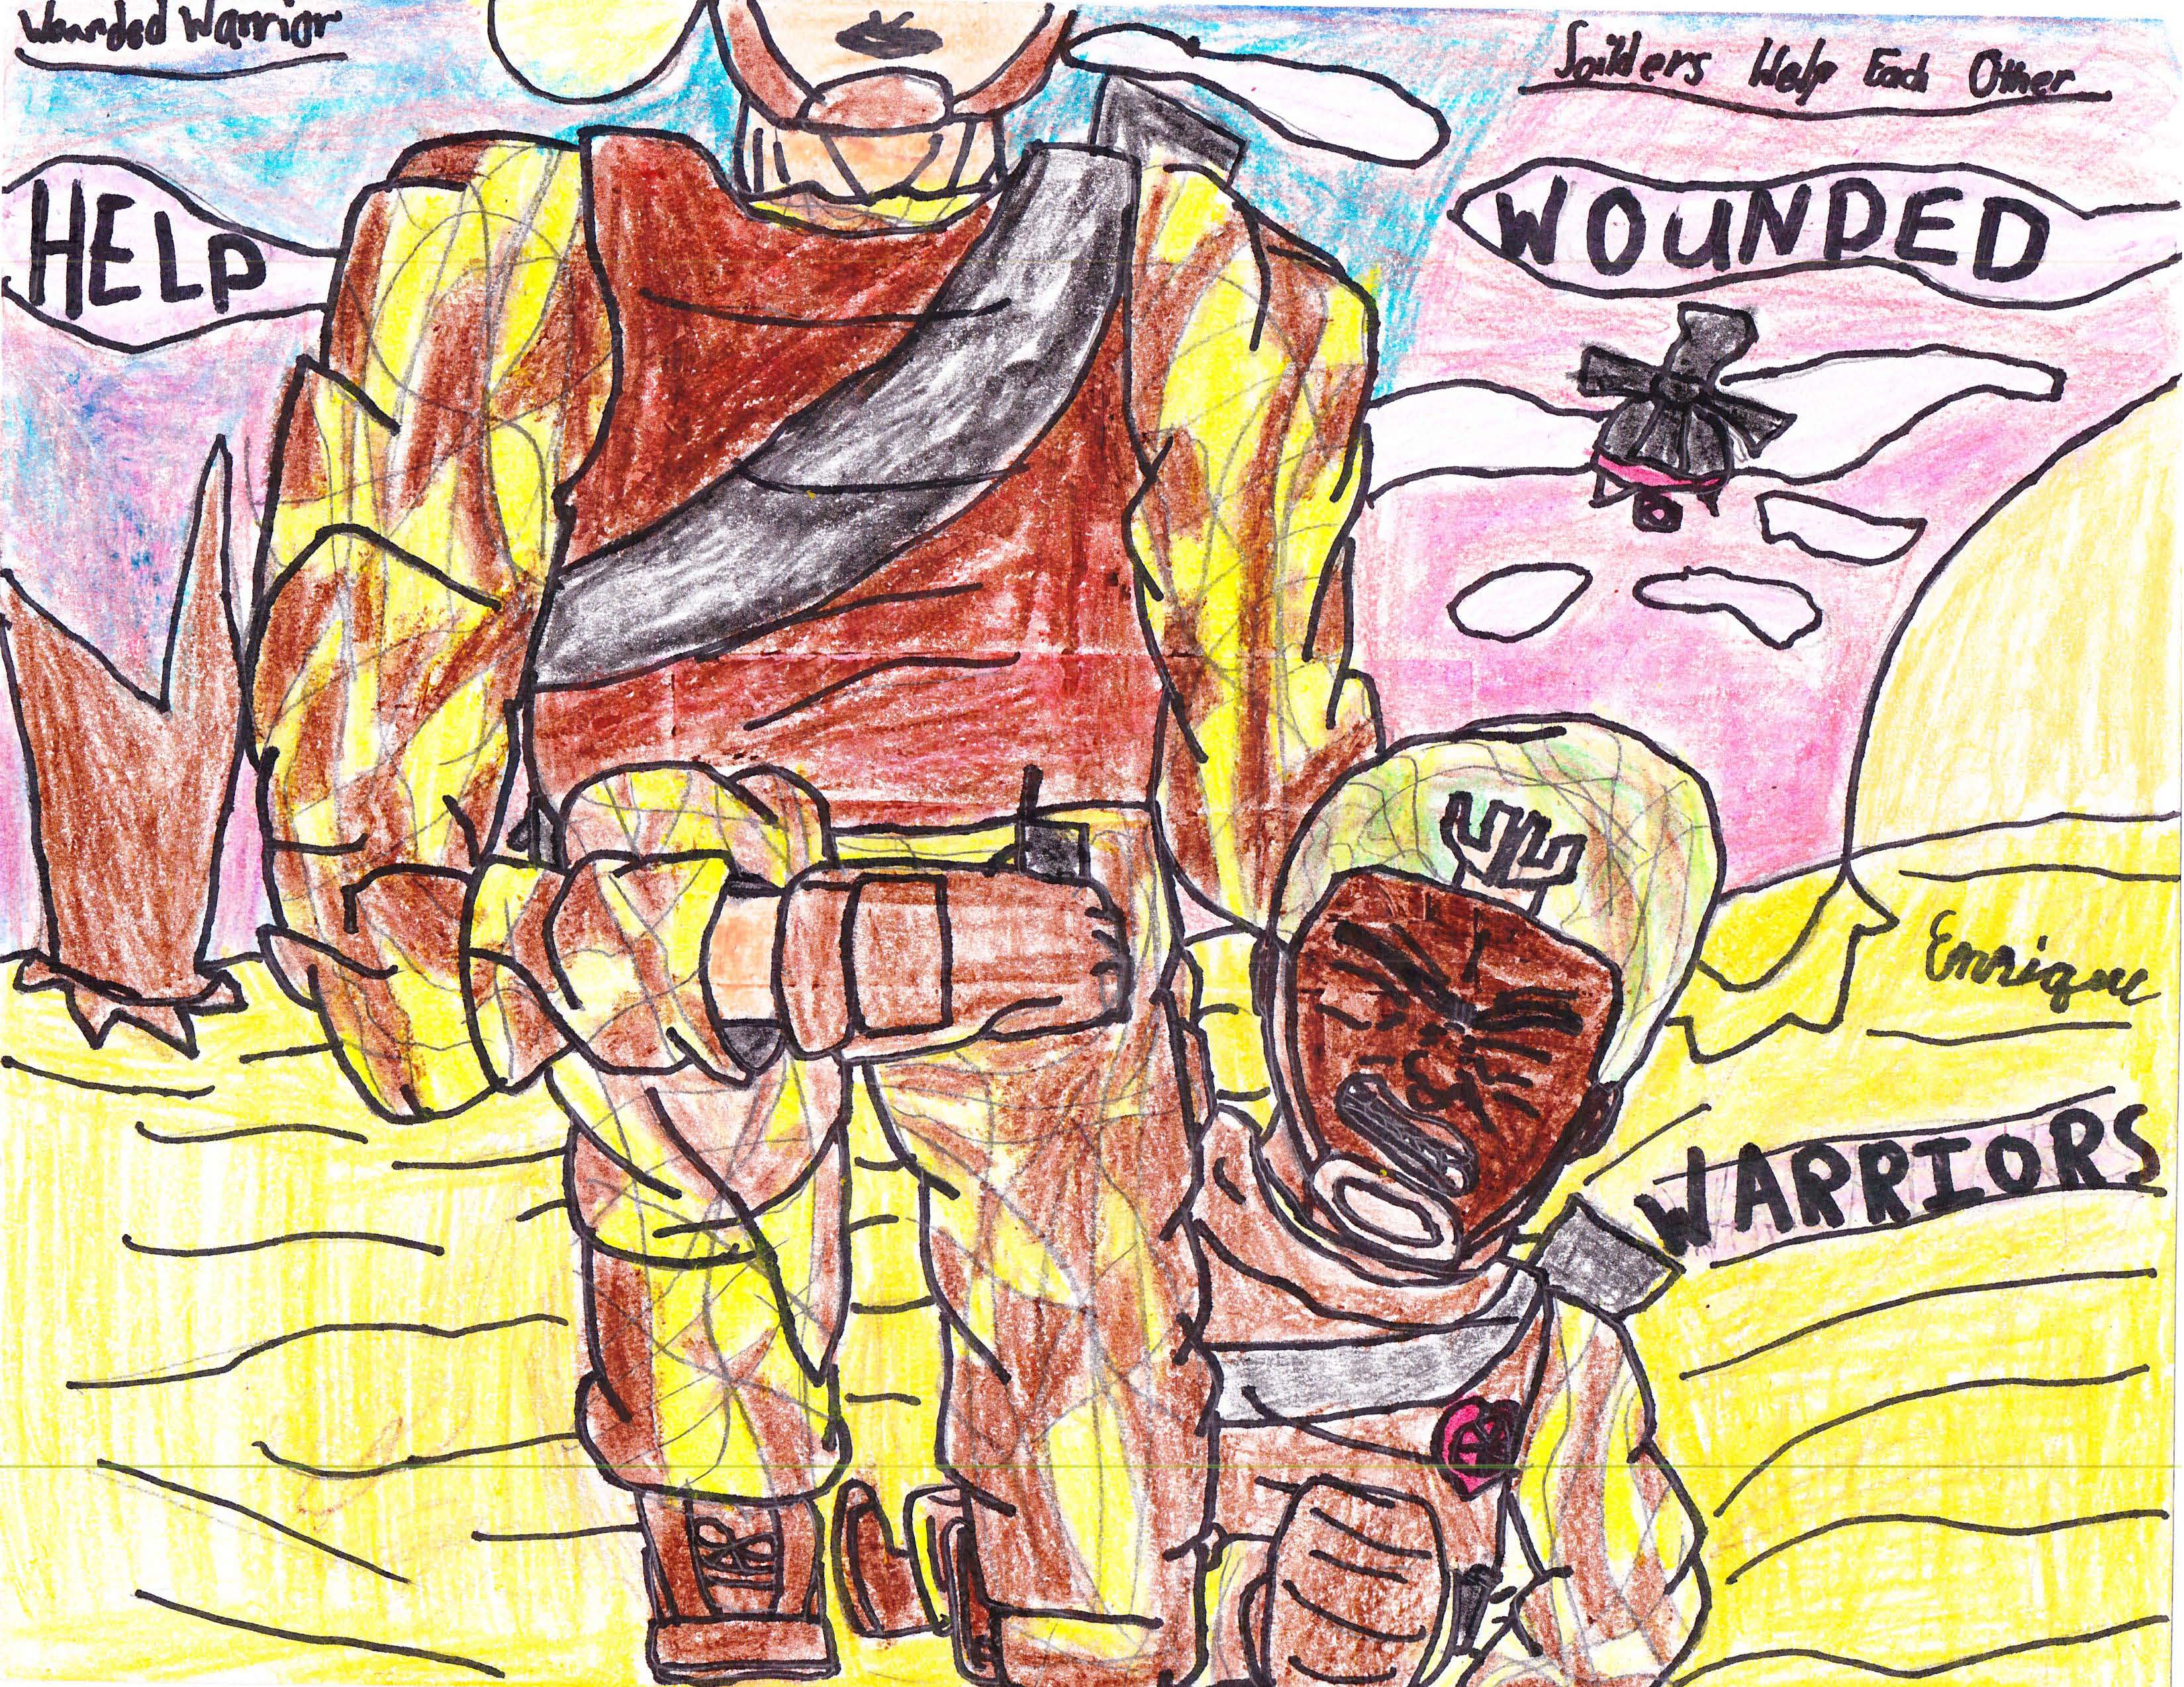 Children's drawing of a serviceman supporting a wounded serviceman